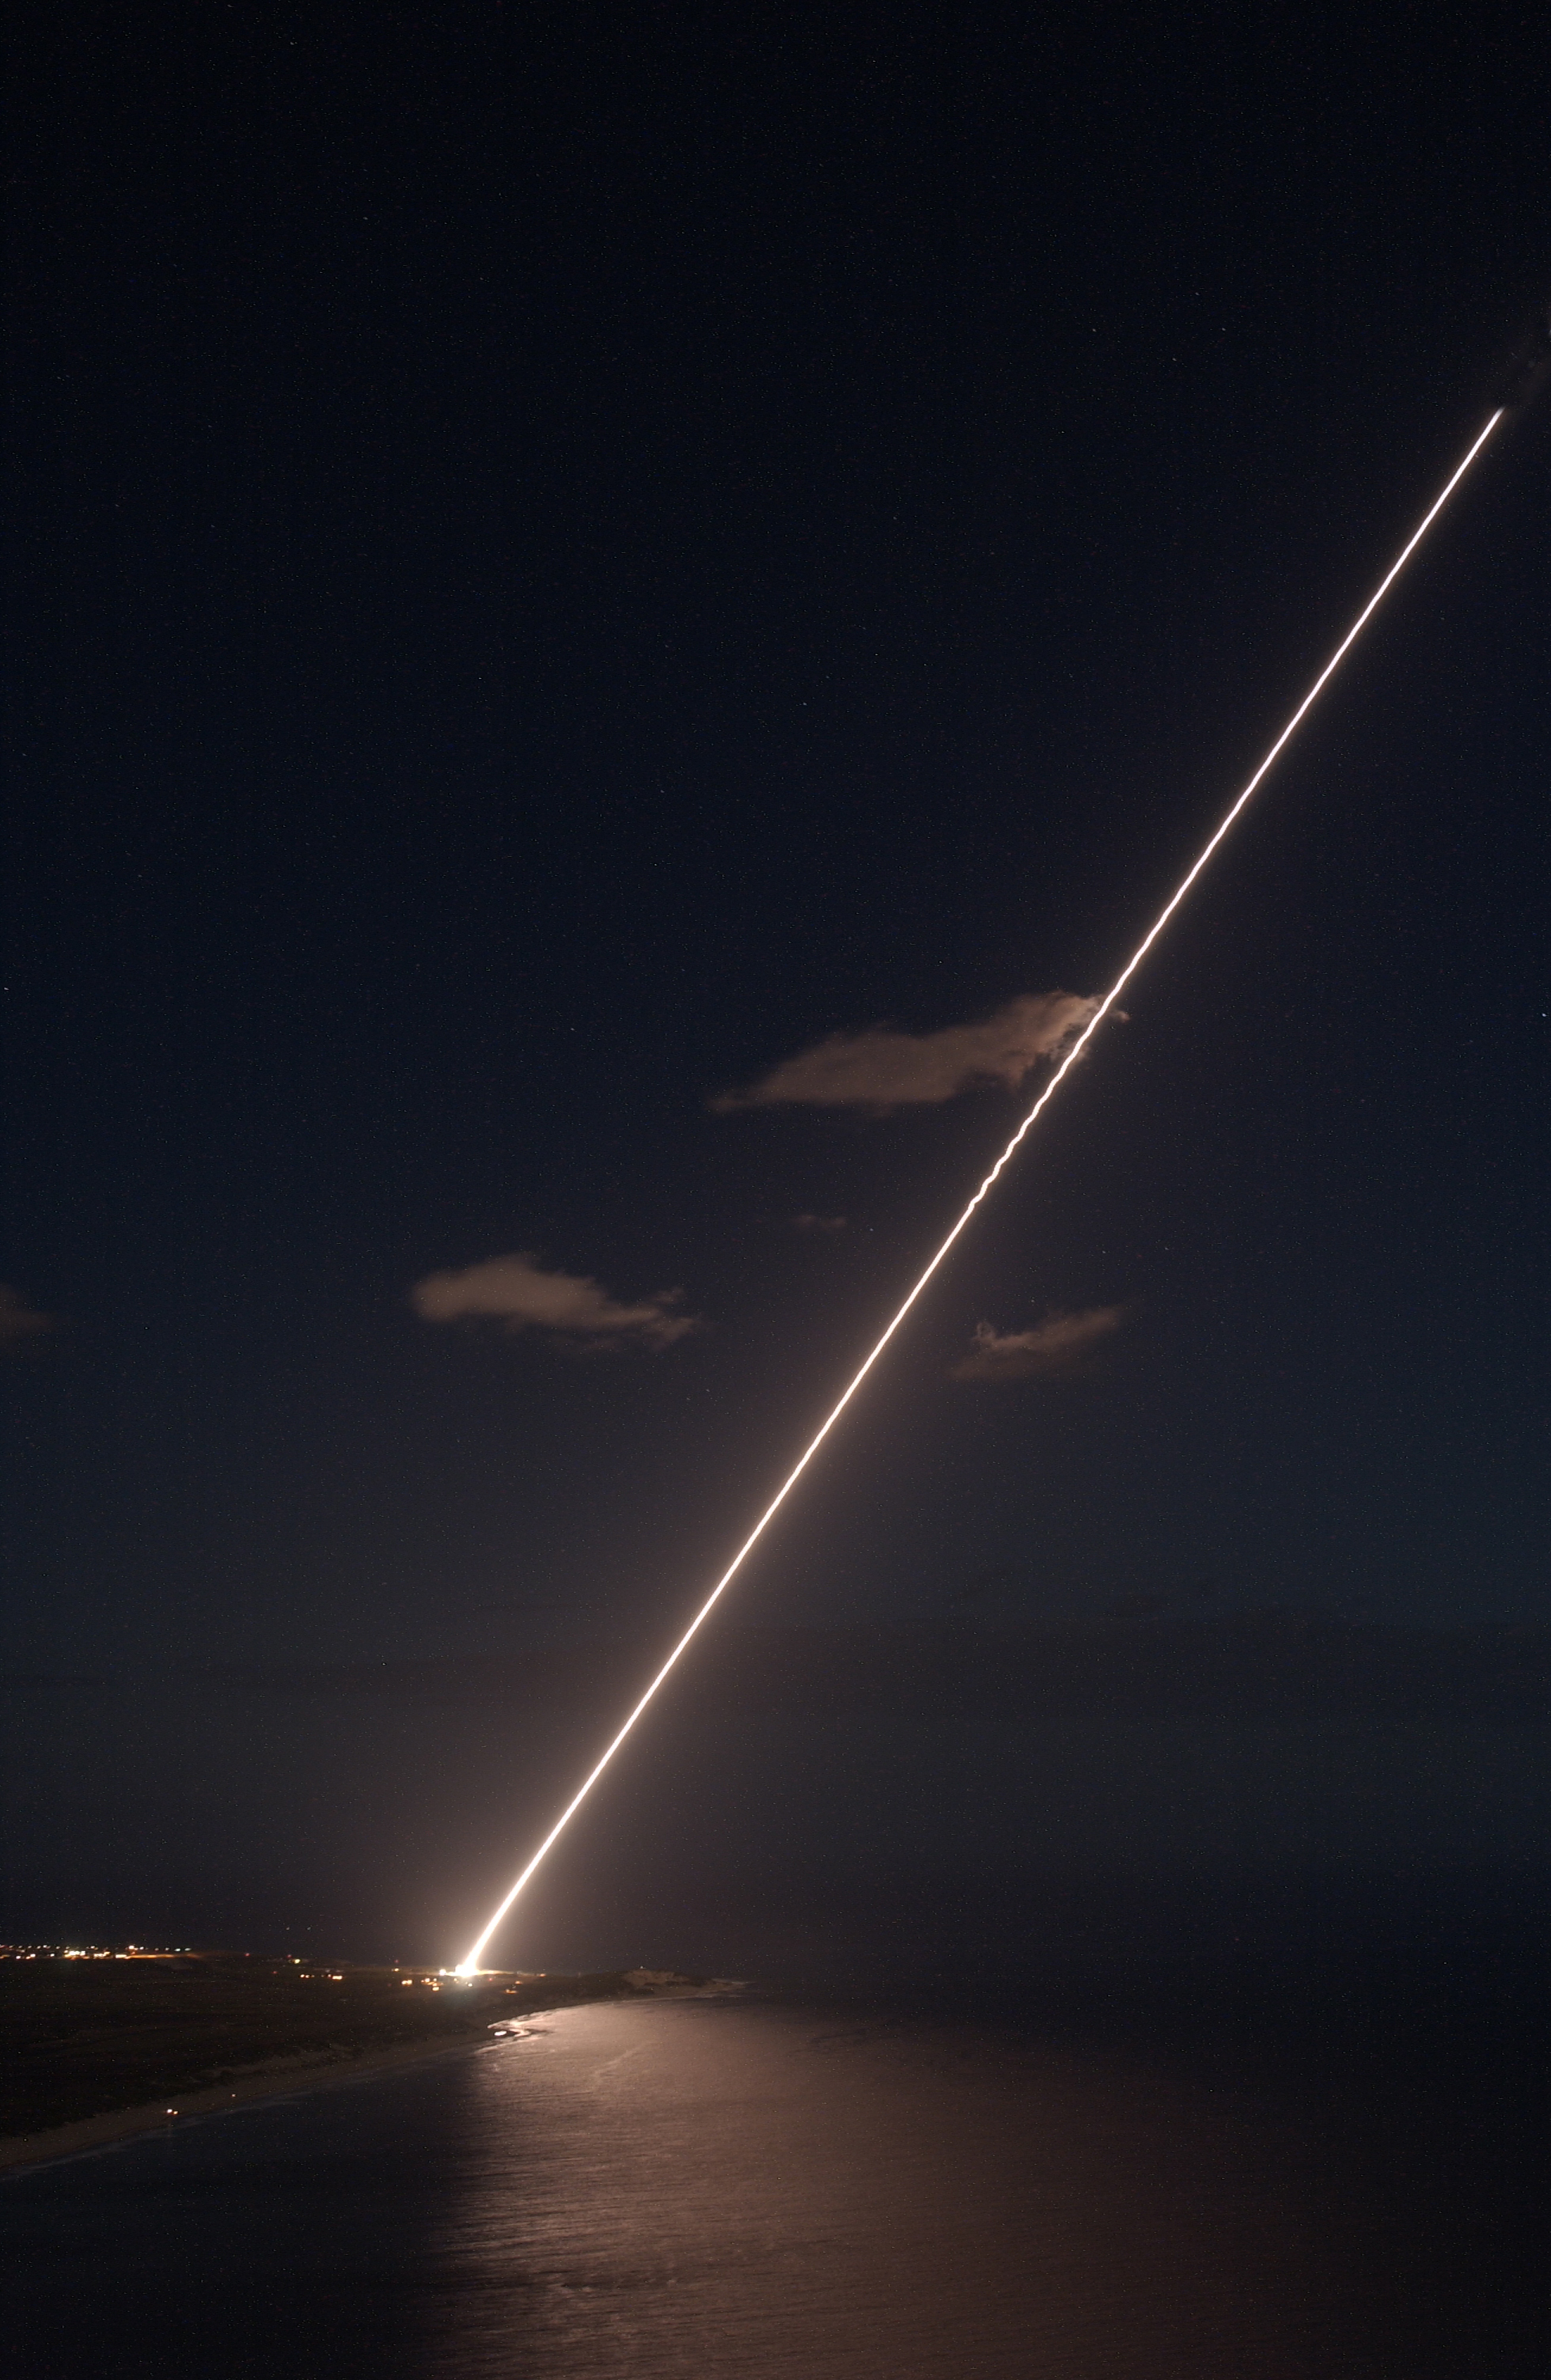 Friday's Missile Defense Test: What Will It Mean?